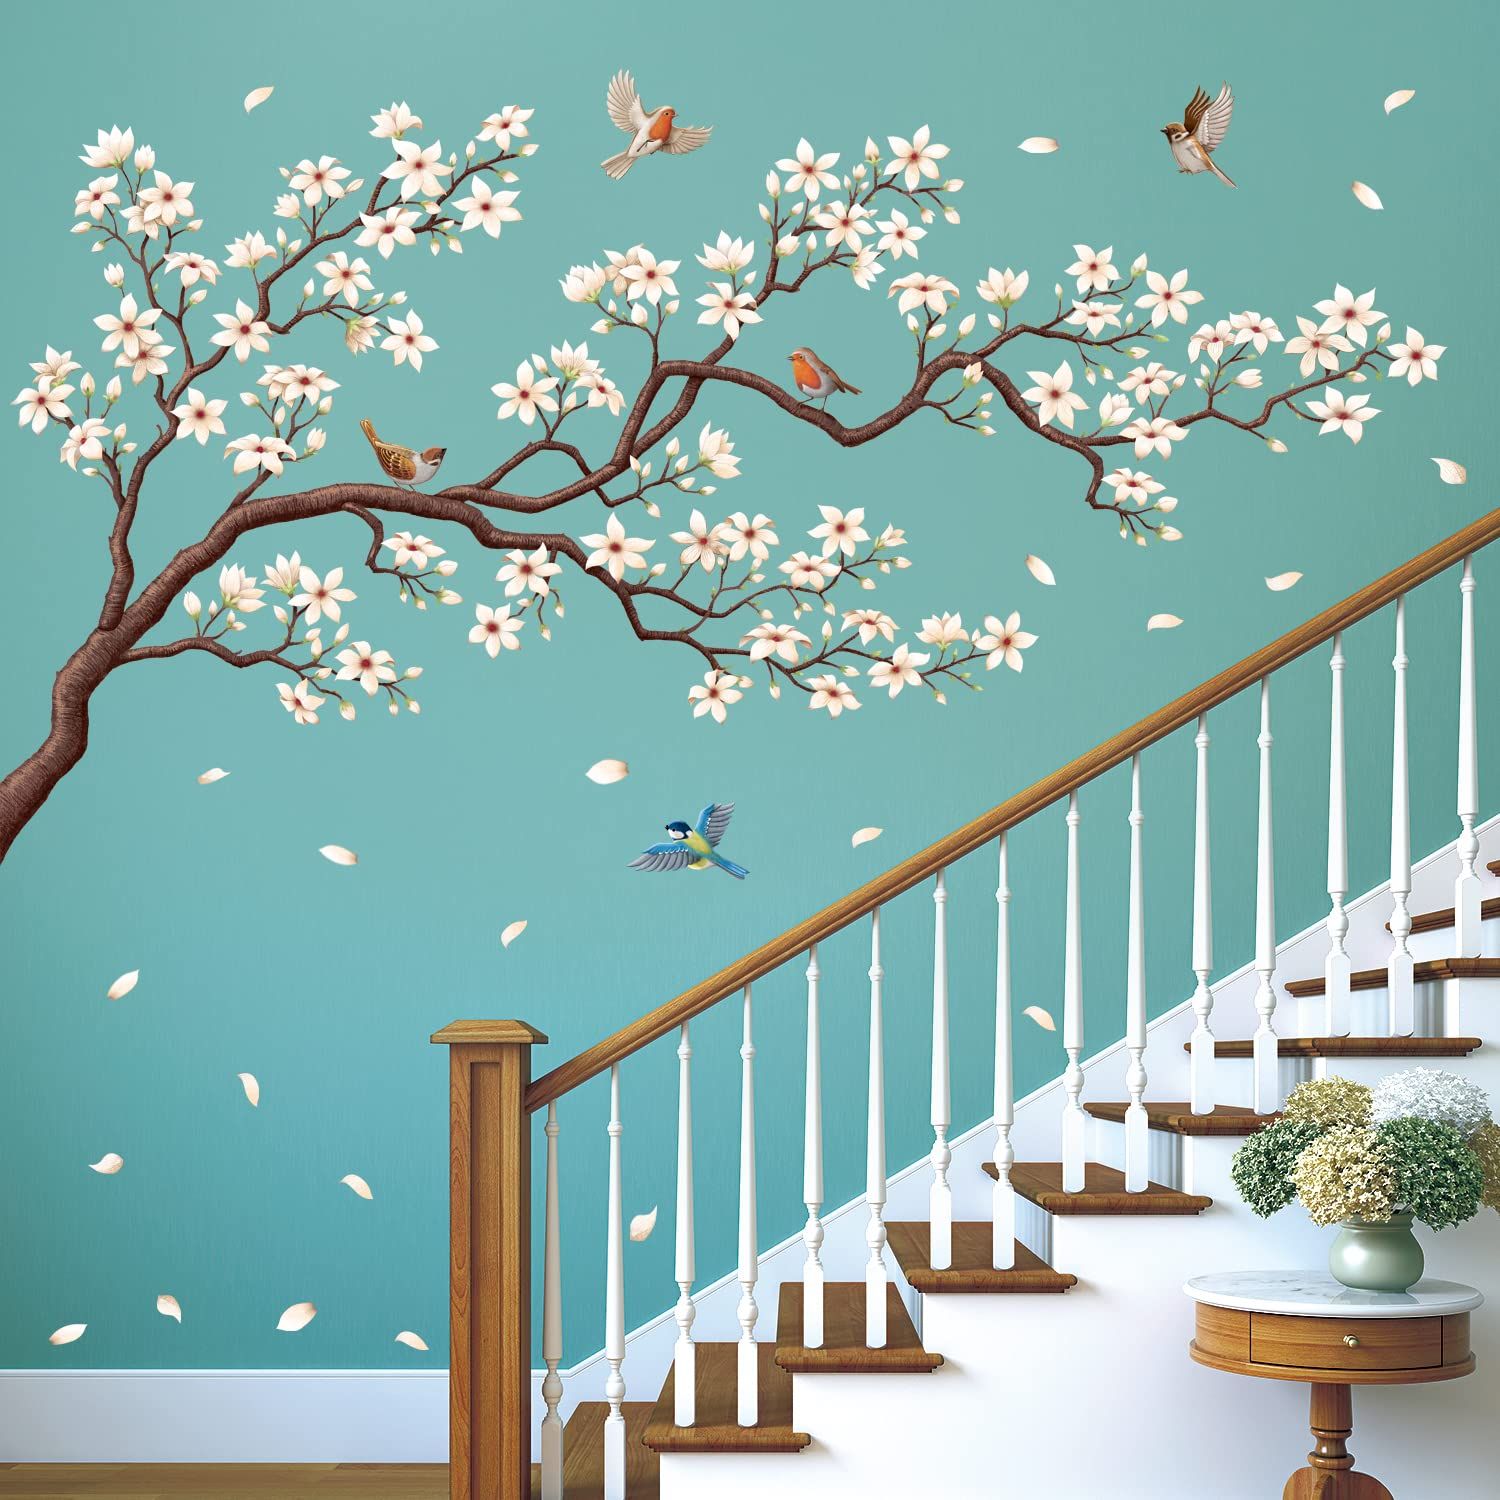 Decorate Your Living Room with Wall Stickers